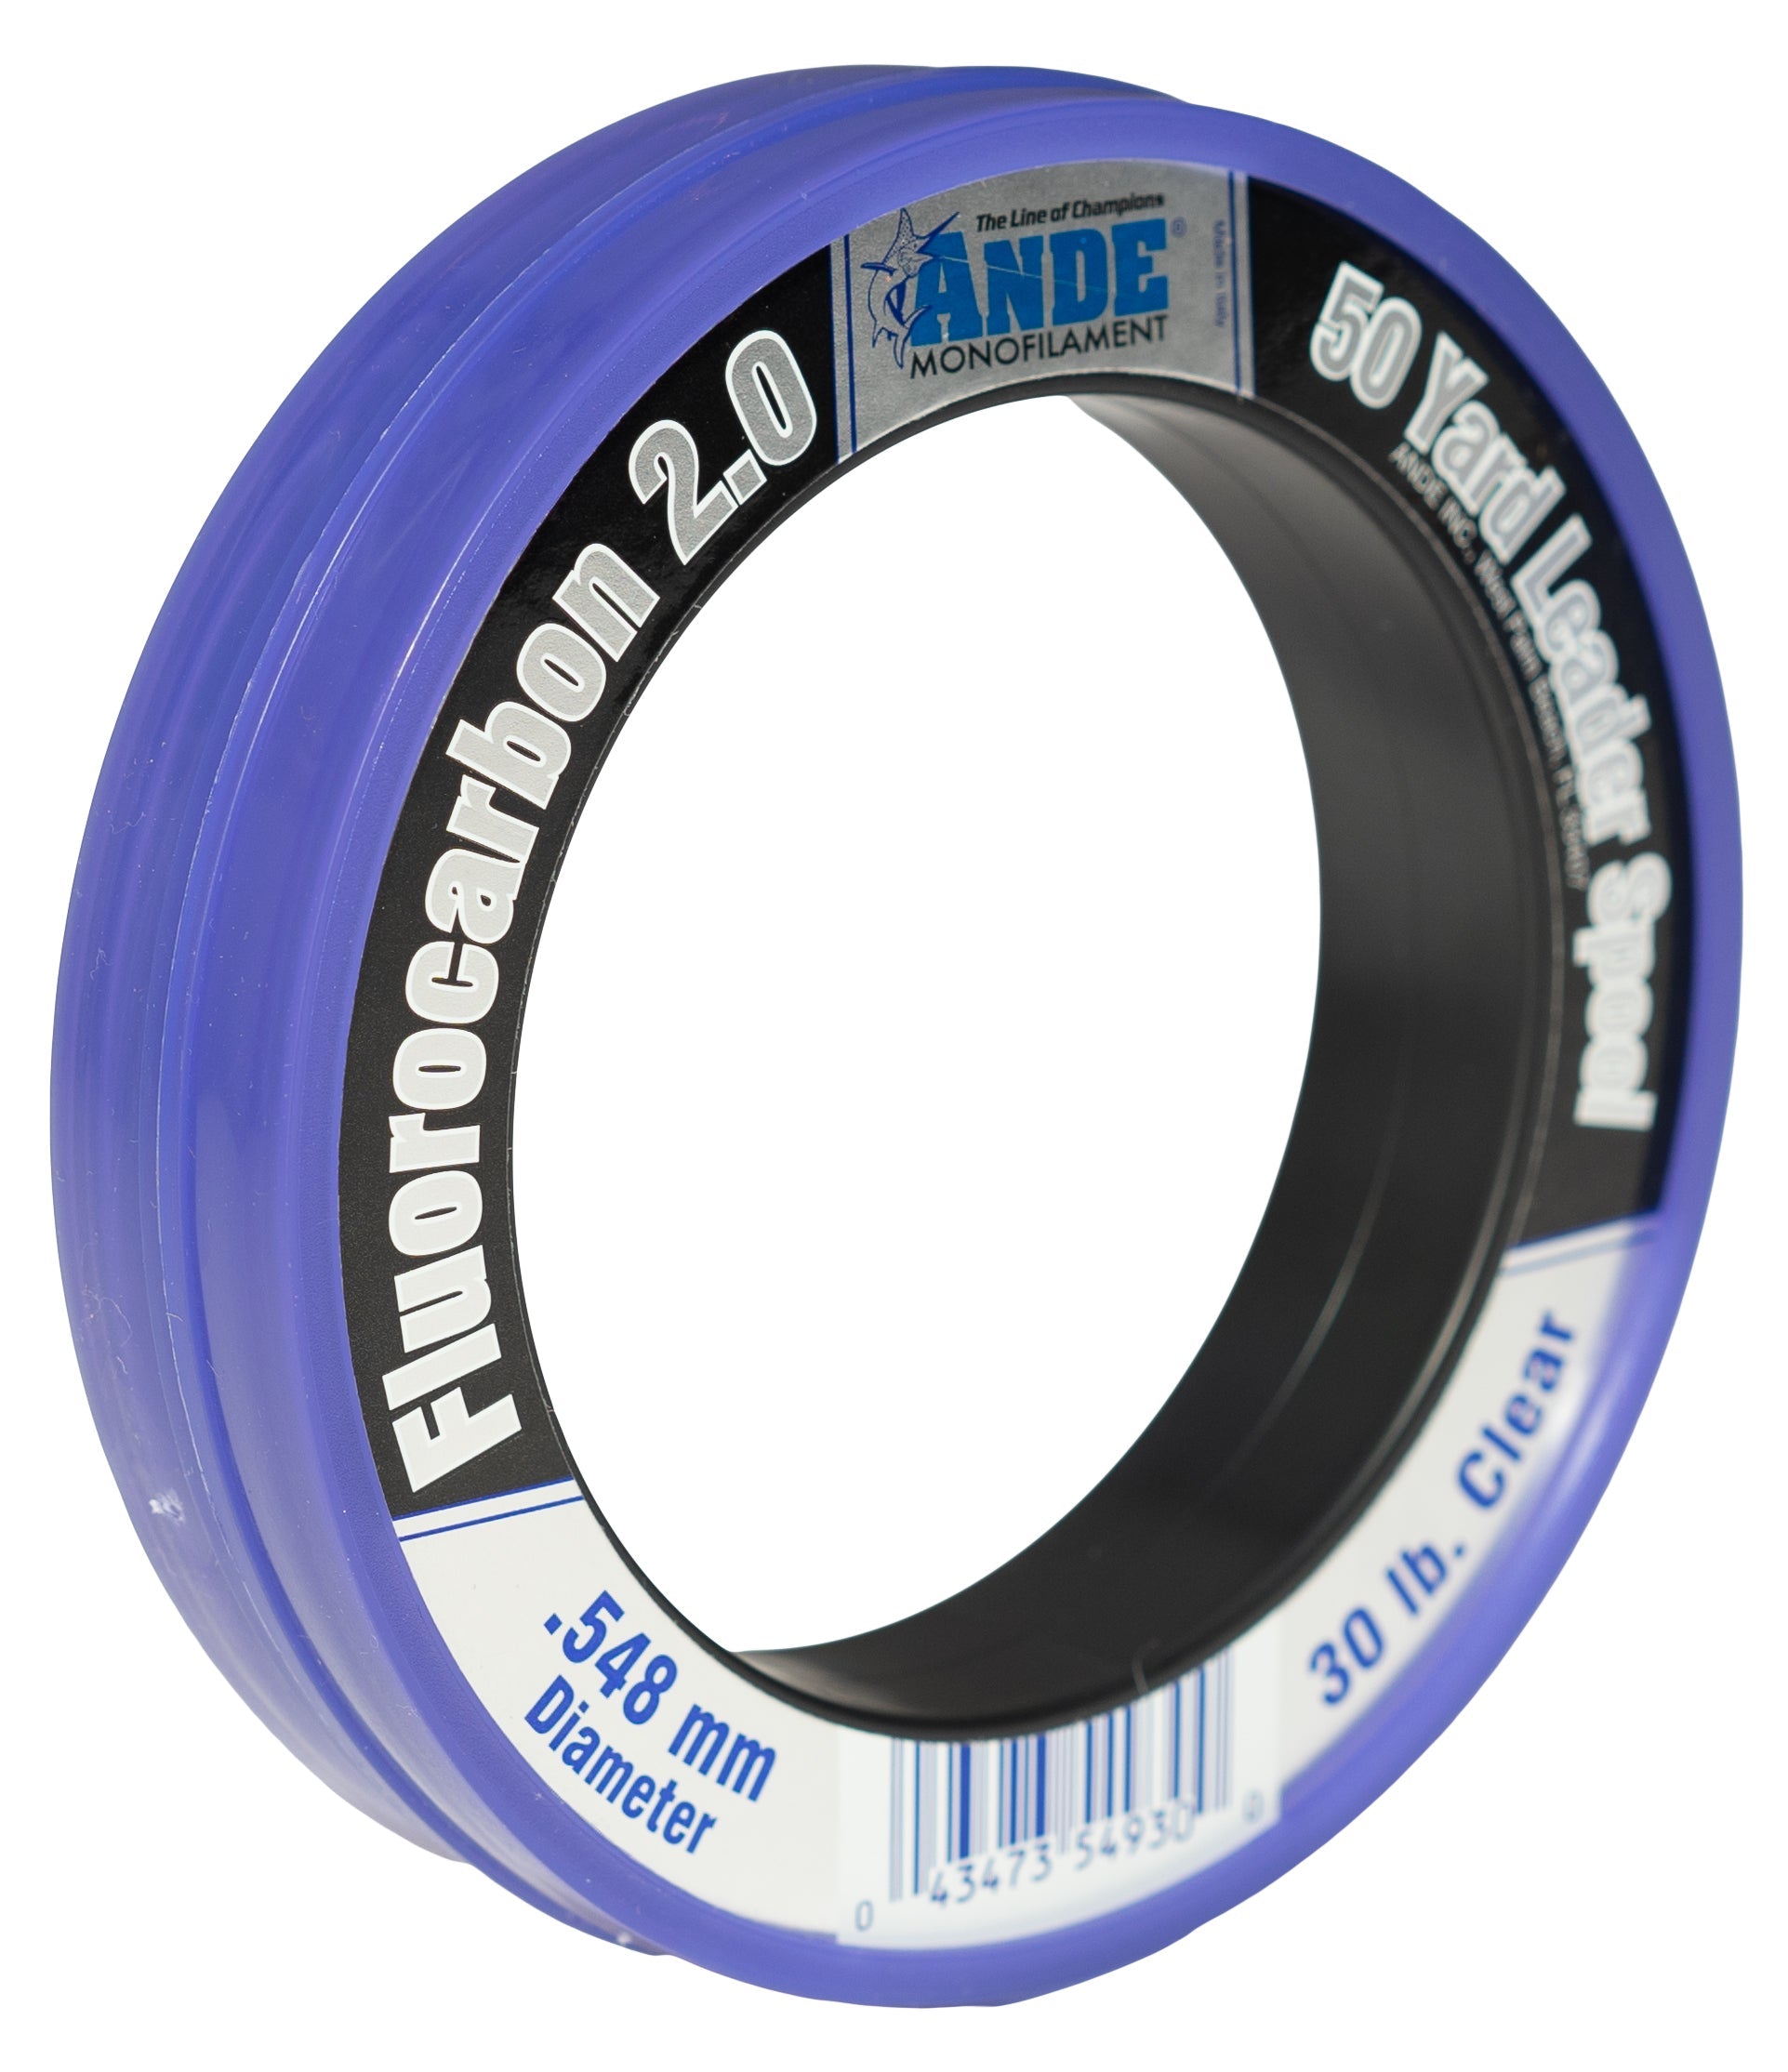 Ande Fluorocarbon 50yd Wrist Spool - Sport Fishing Supply Store